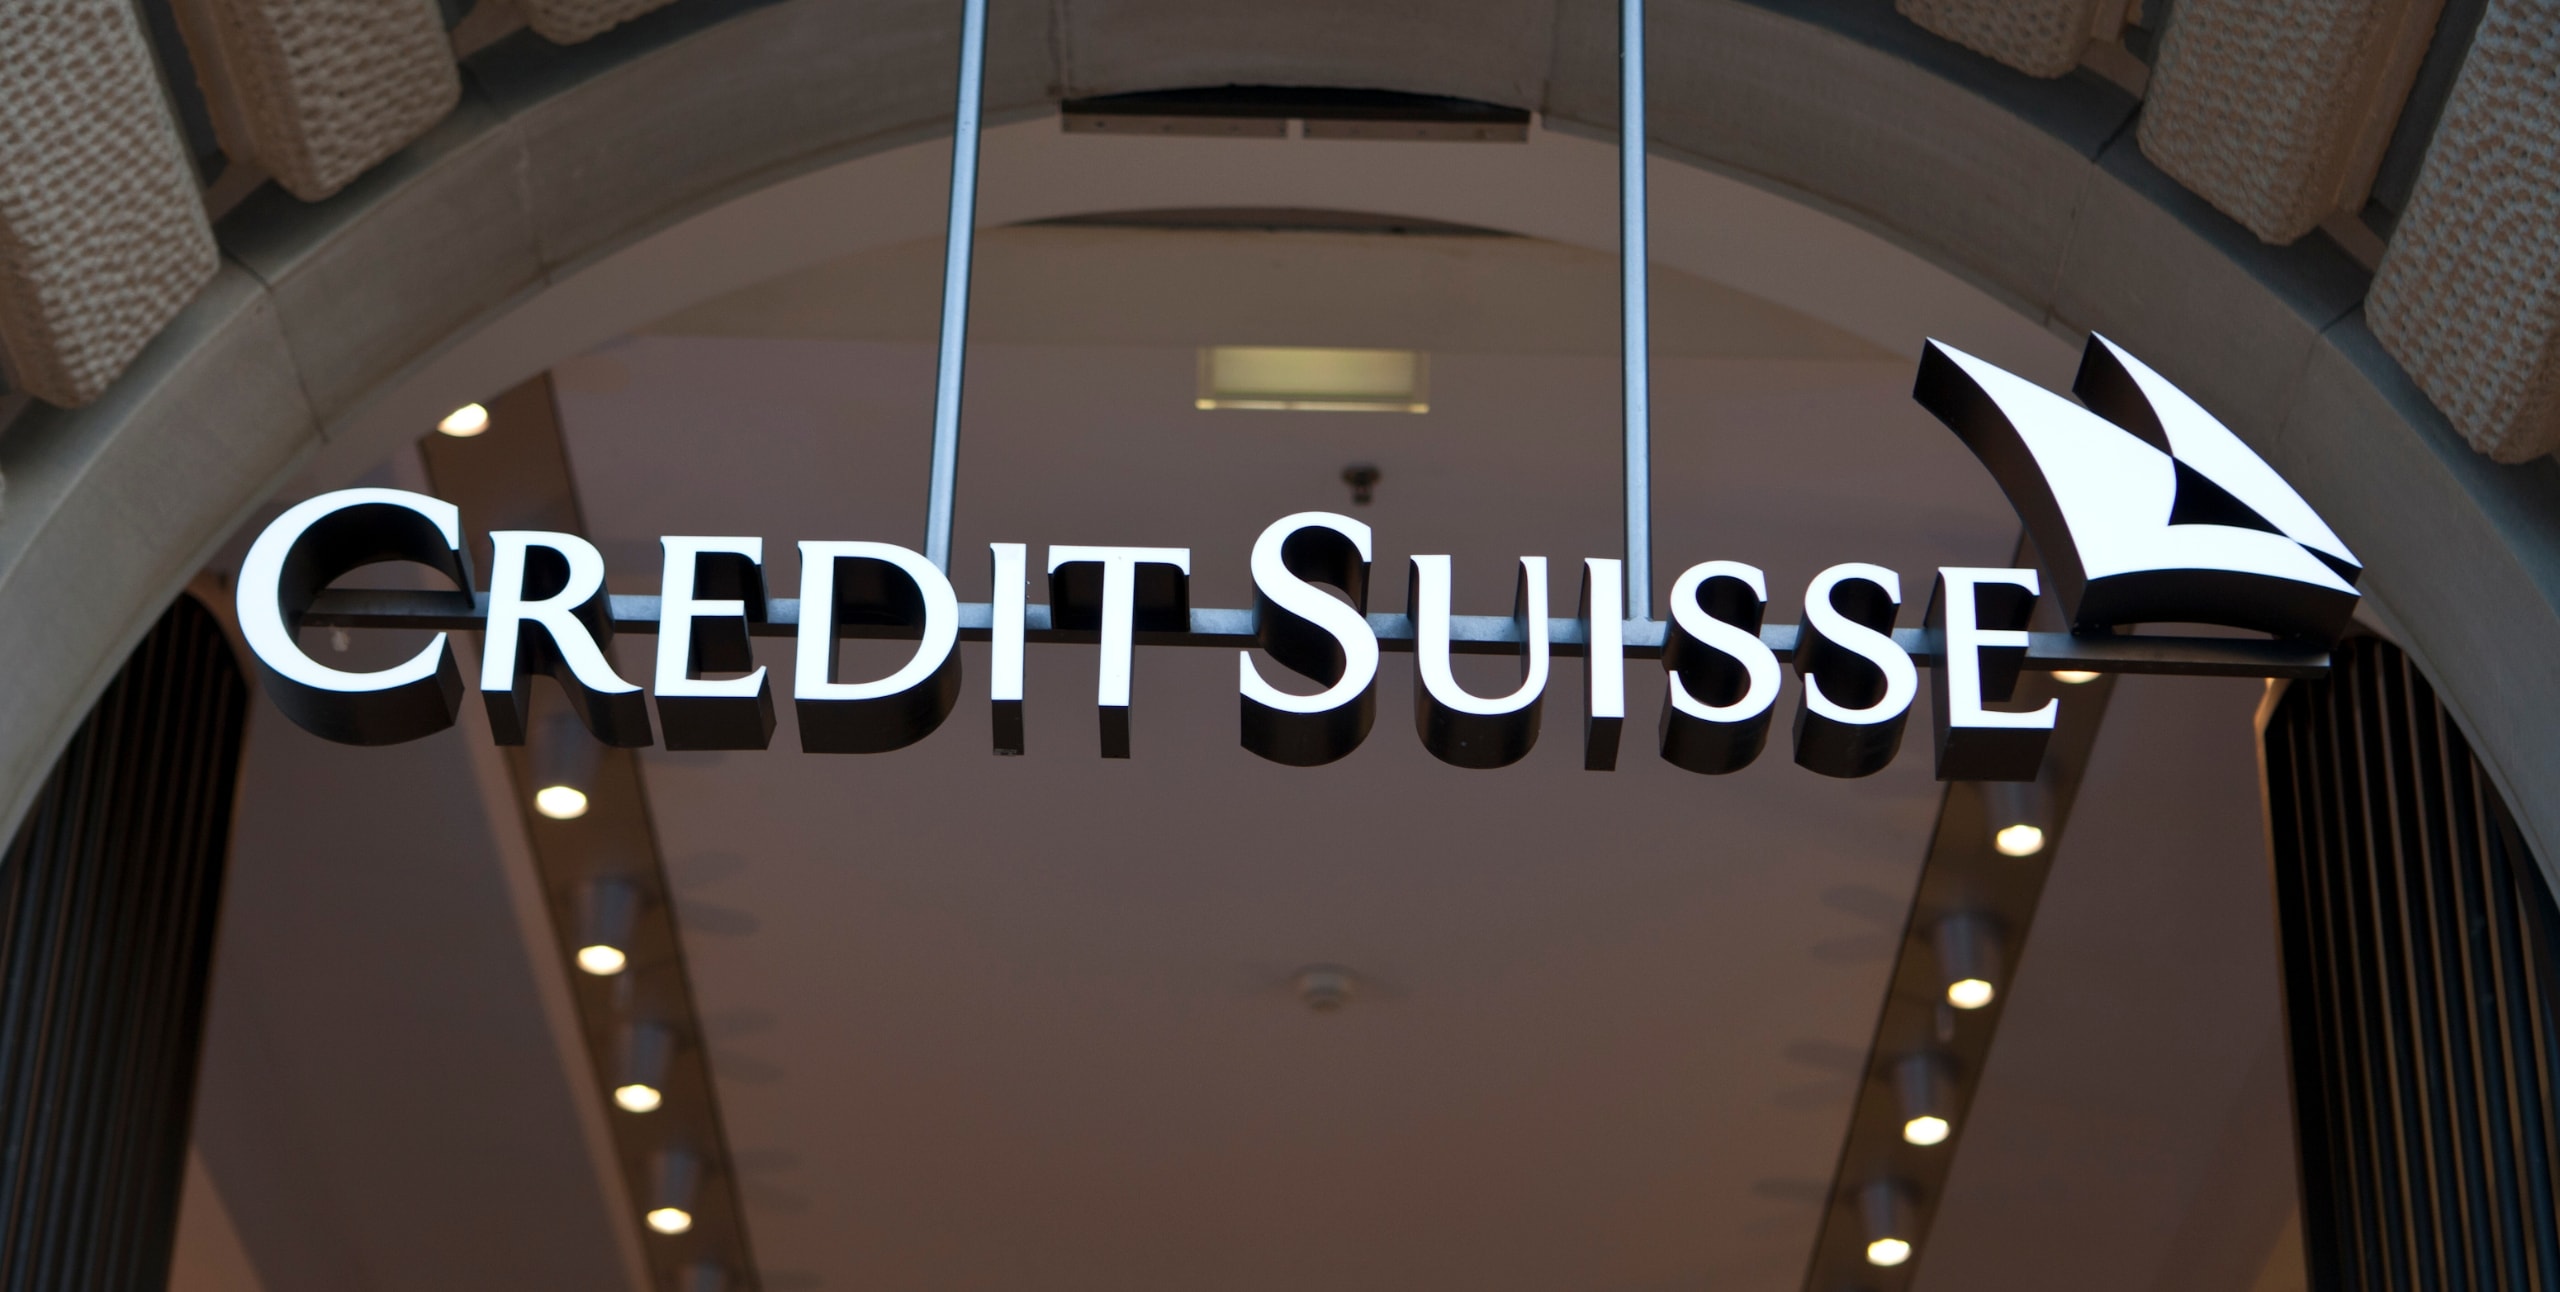 credit suisse logo in front of bank